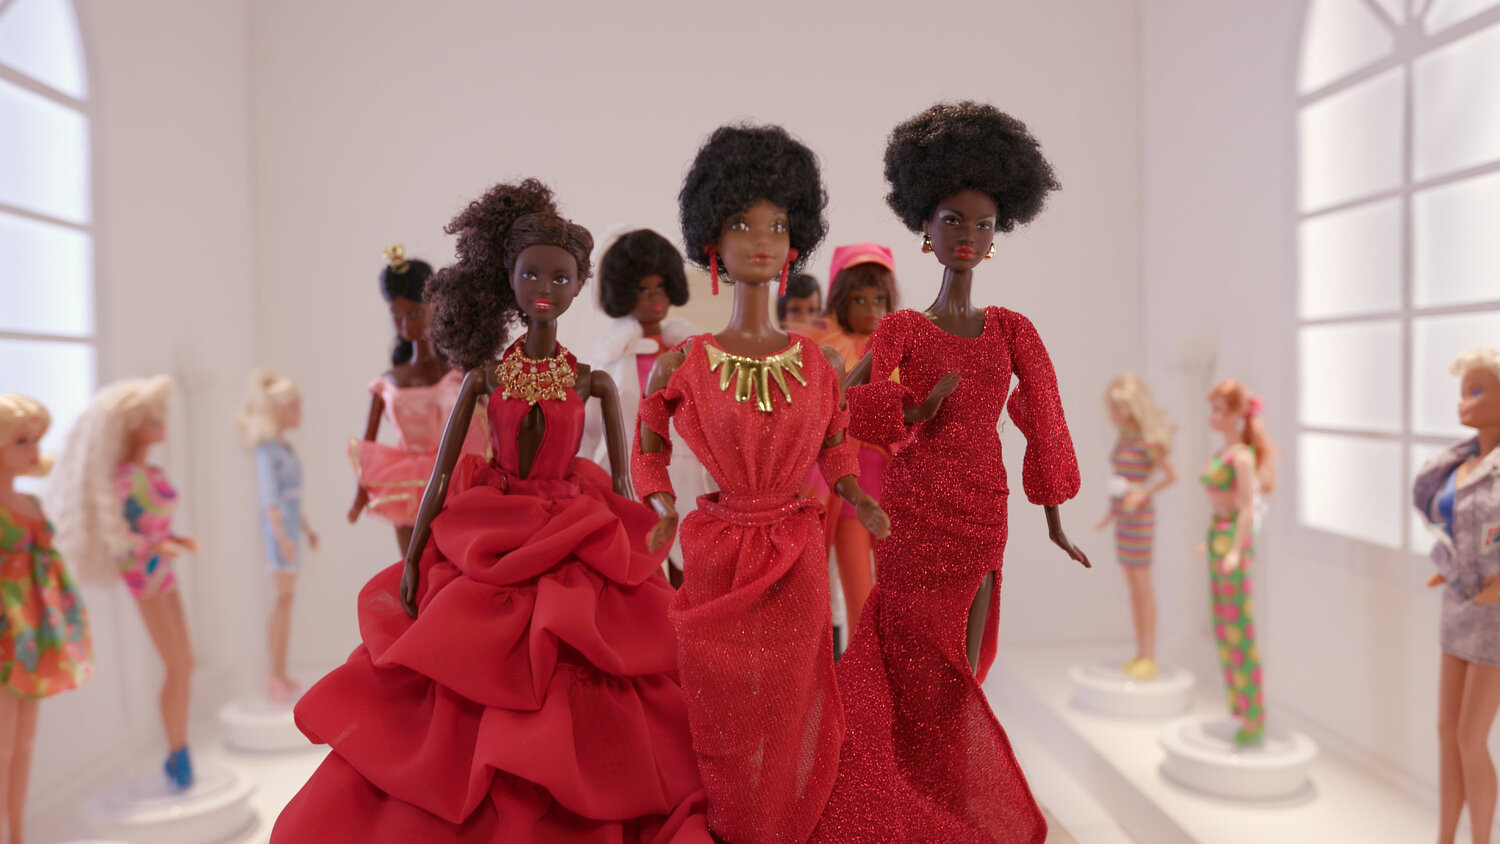 'Black Barbie,' a documentary that reflects on the pivotal moment when Mattel introduced the doll in 1980, will open the eighth annual Indigo Moon Film Fest.